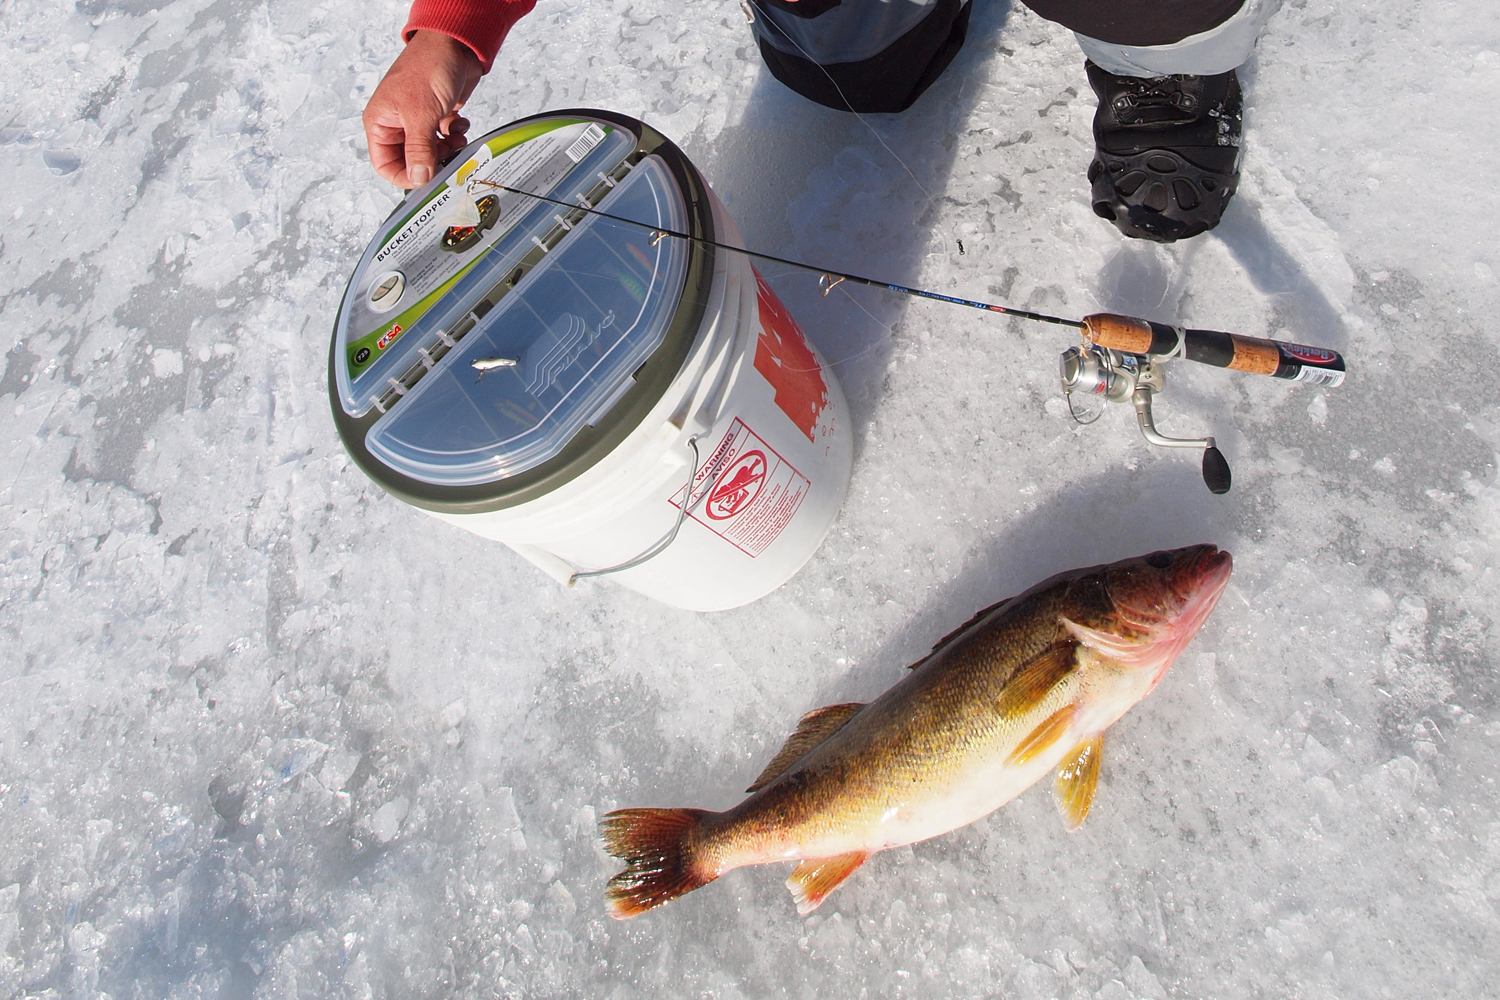 Early Ice Perch Fishing - Catch Cover